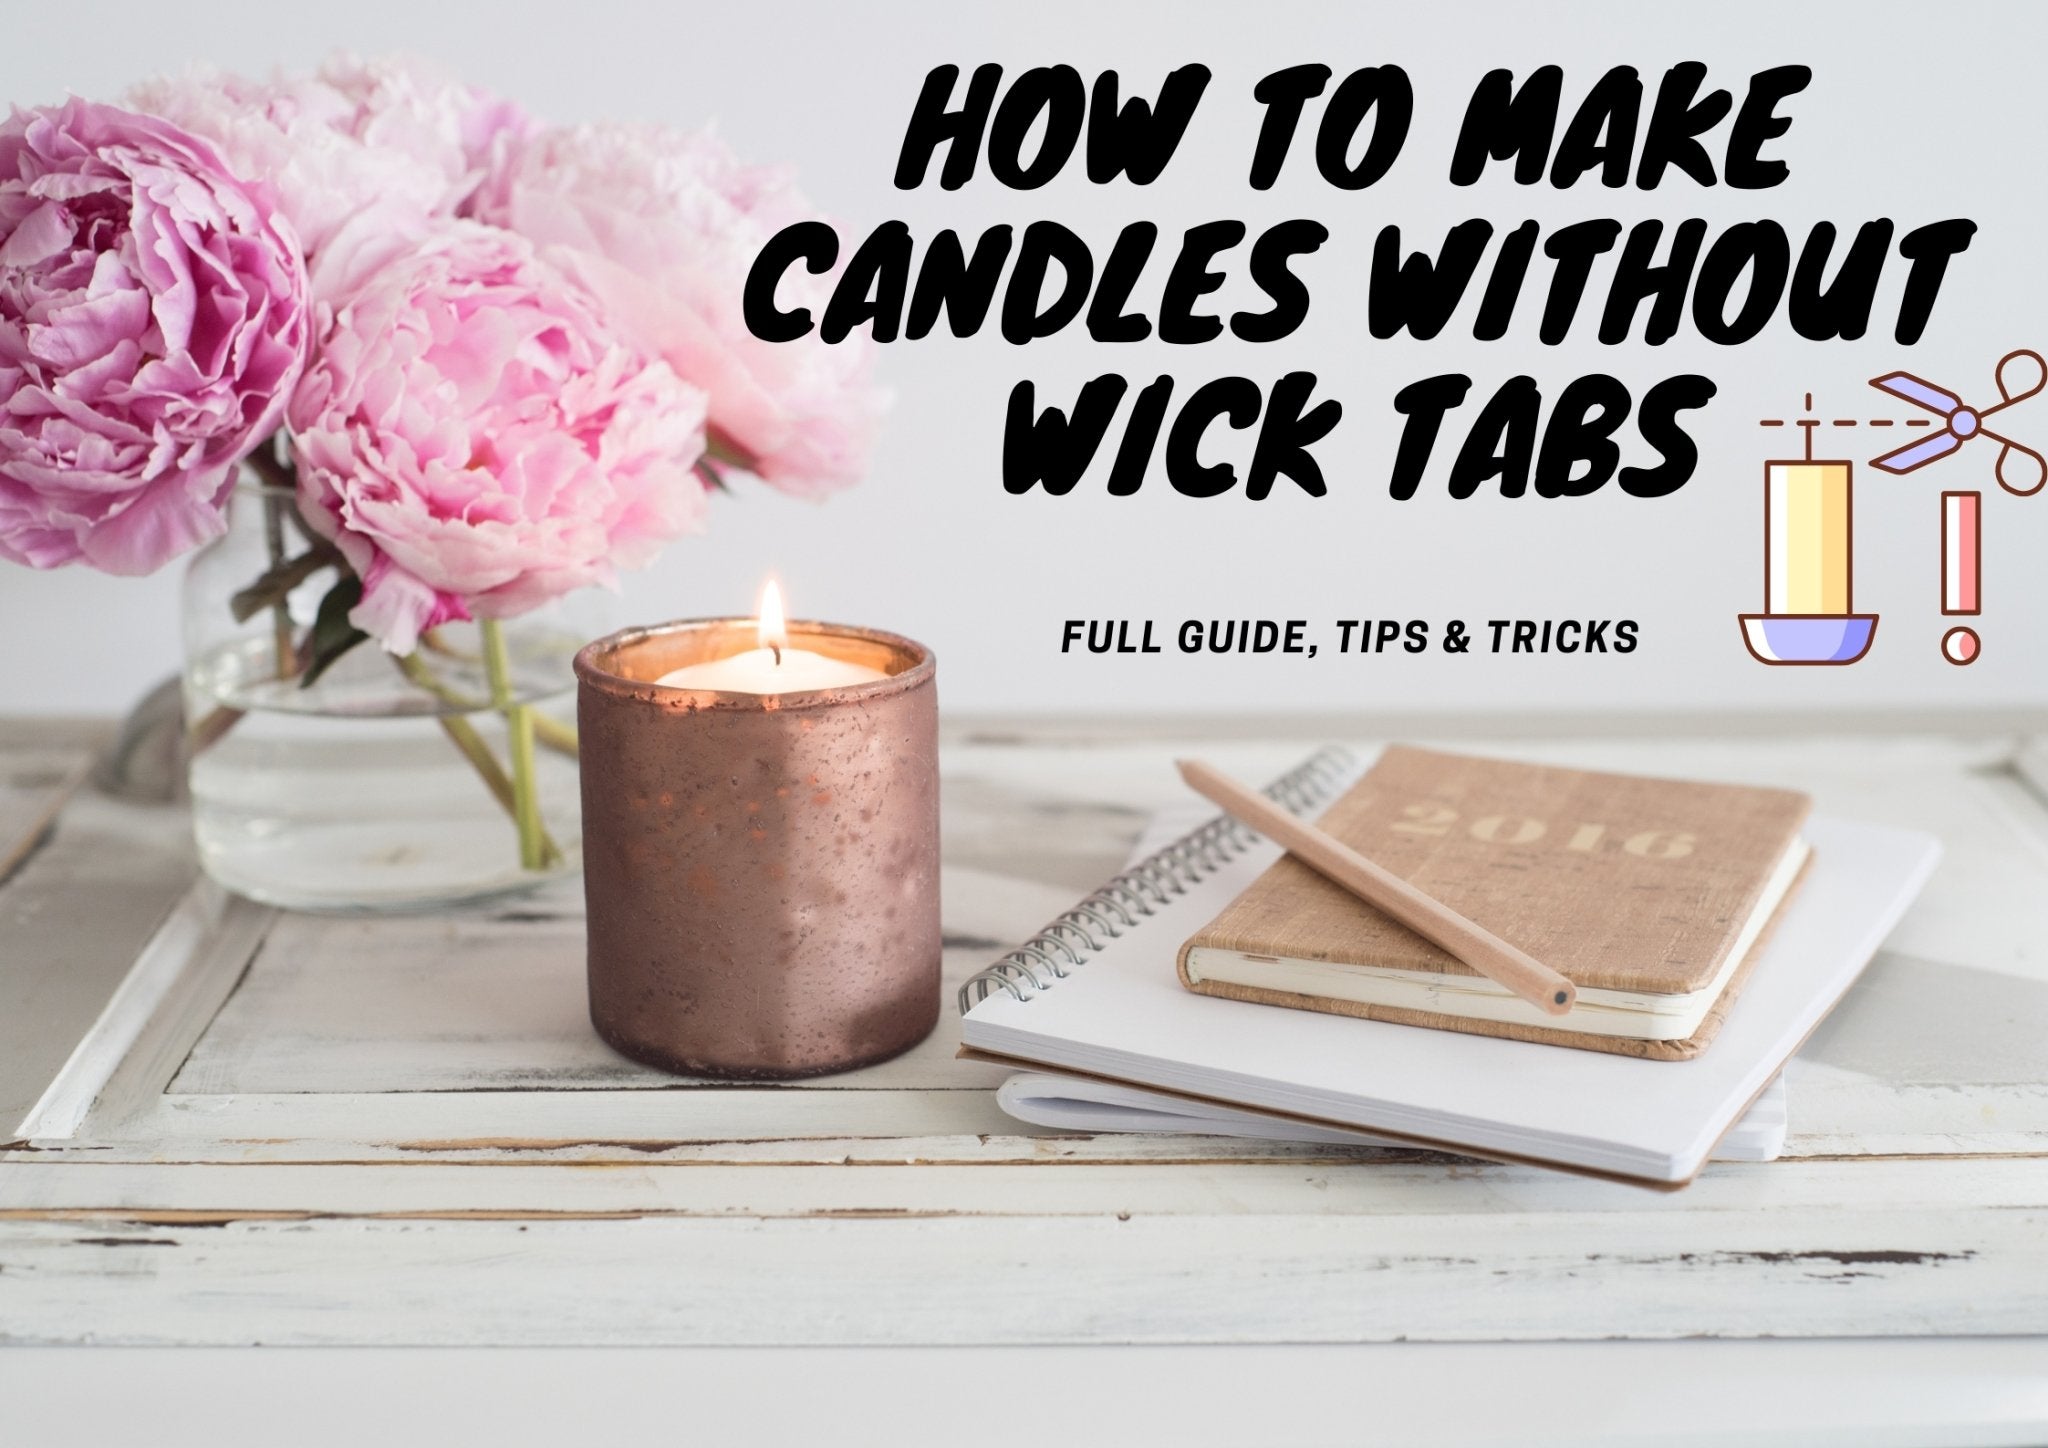 Making candles without wick tabs – Suffolk Candles